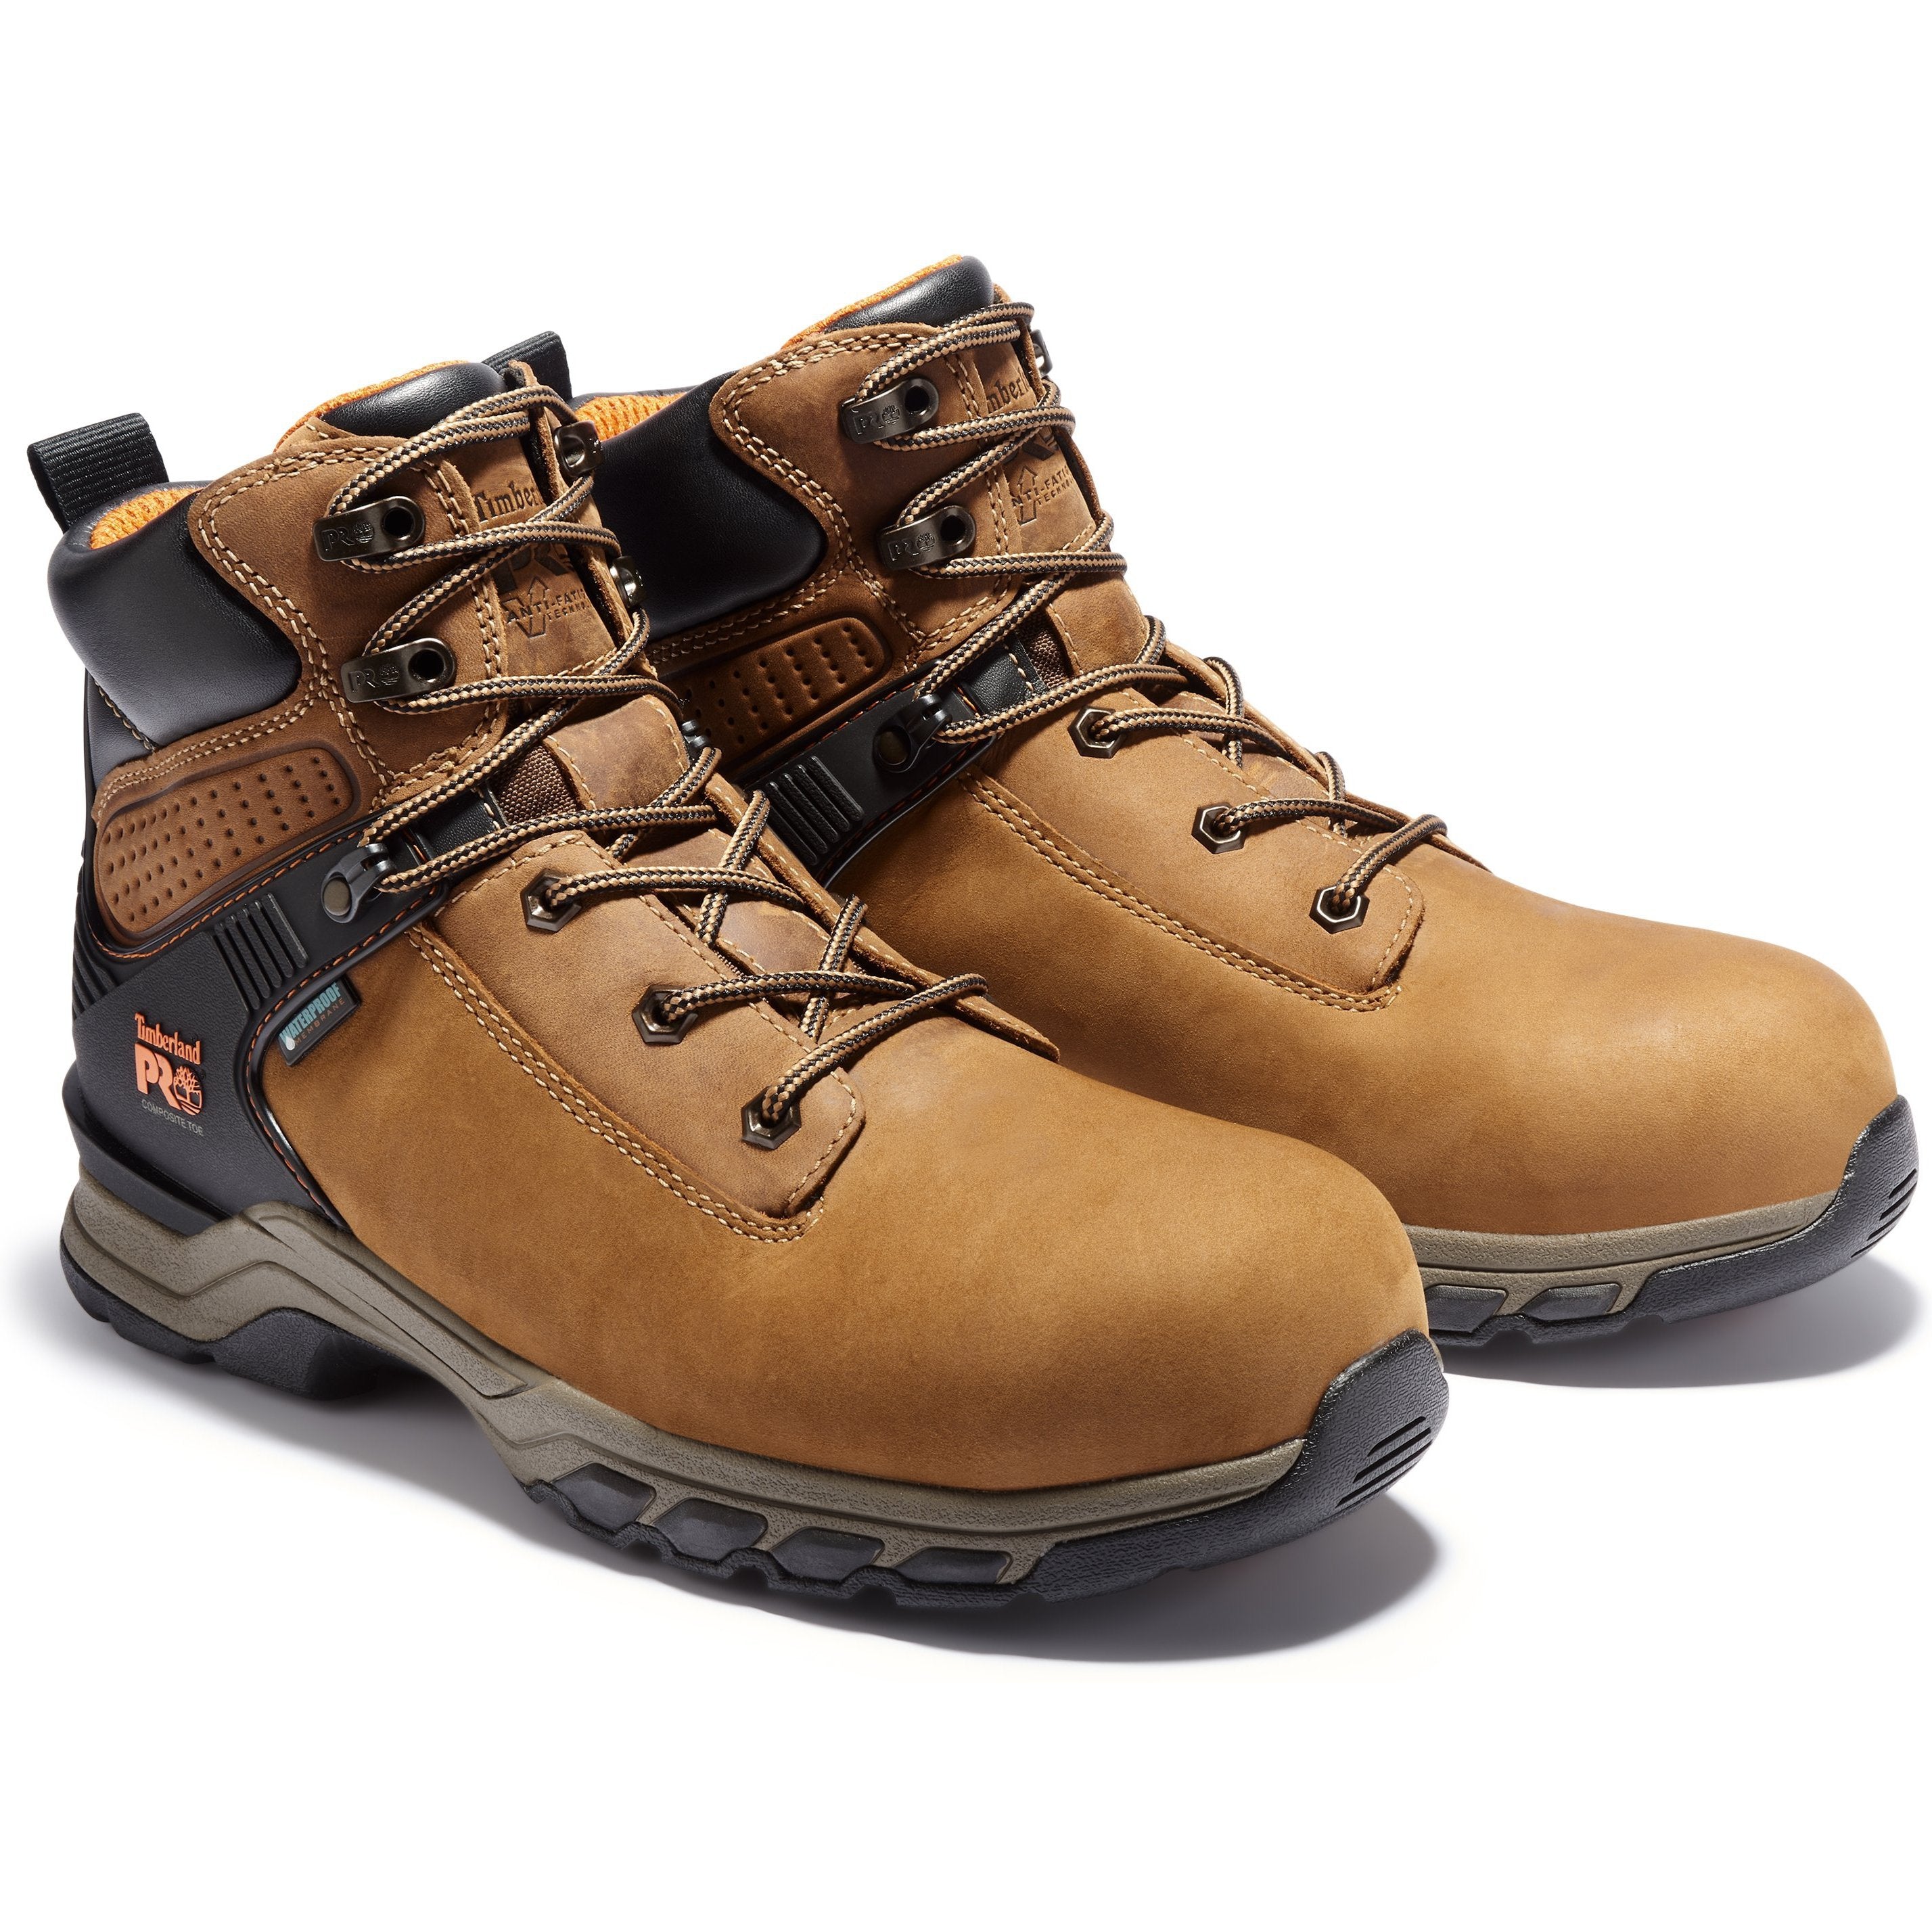 Timberland PRO Men's Hypercharge 6" Comp Toe WP Work Boot TB0A1RVS214 8.5 / Medium / Brown - Overlook Boots